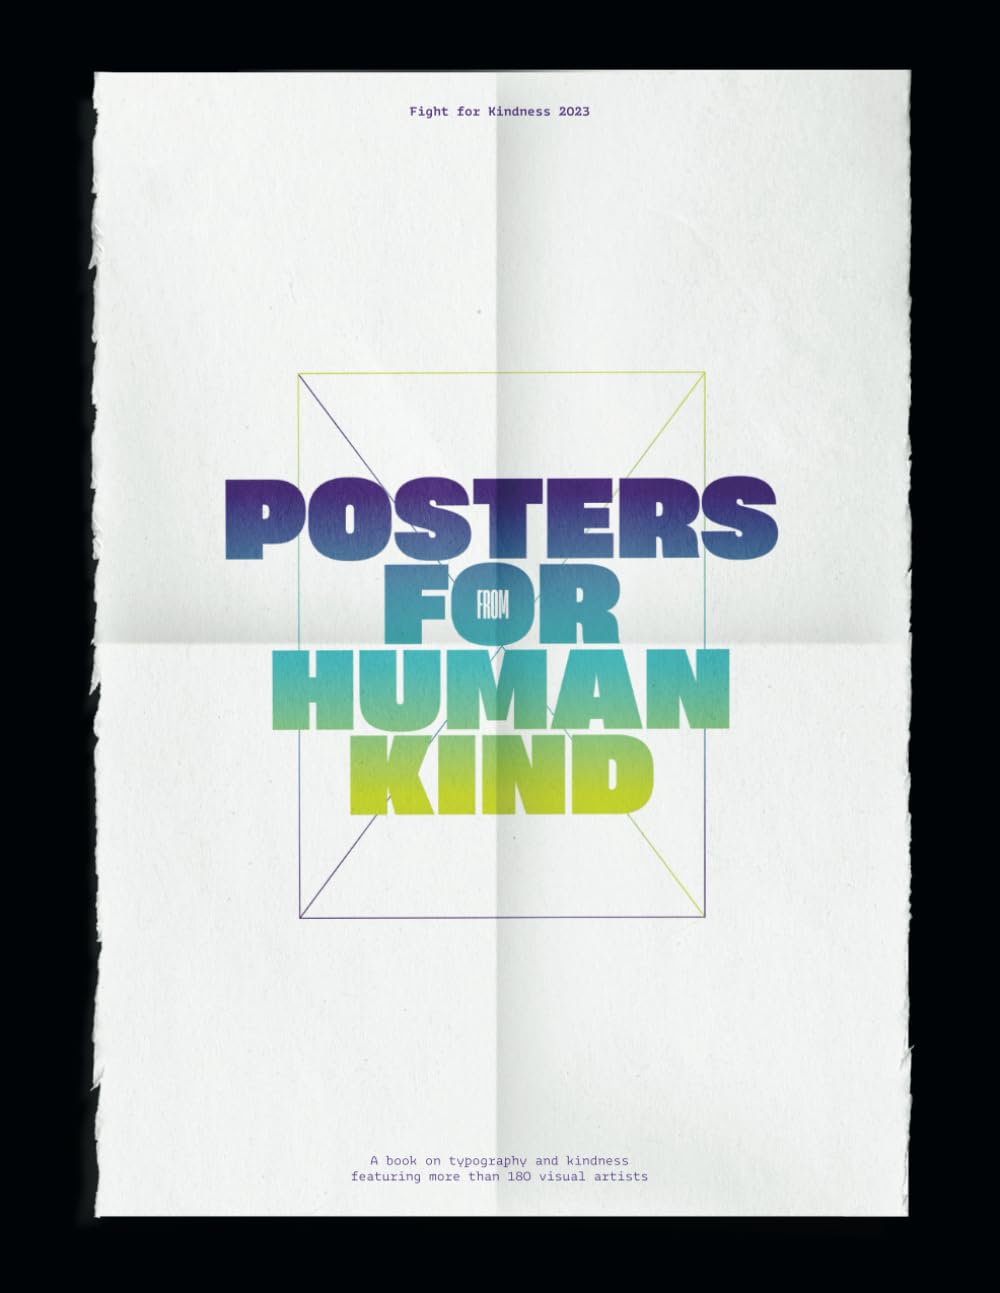 Posters for Human Kind: Fight for Kindness